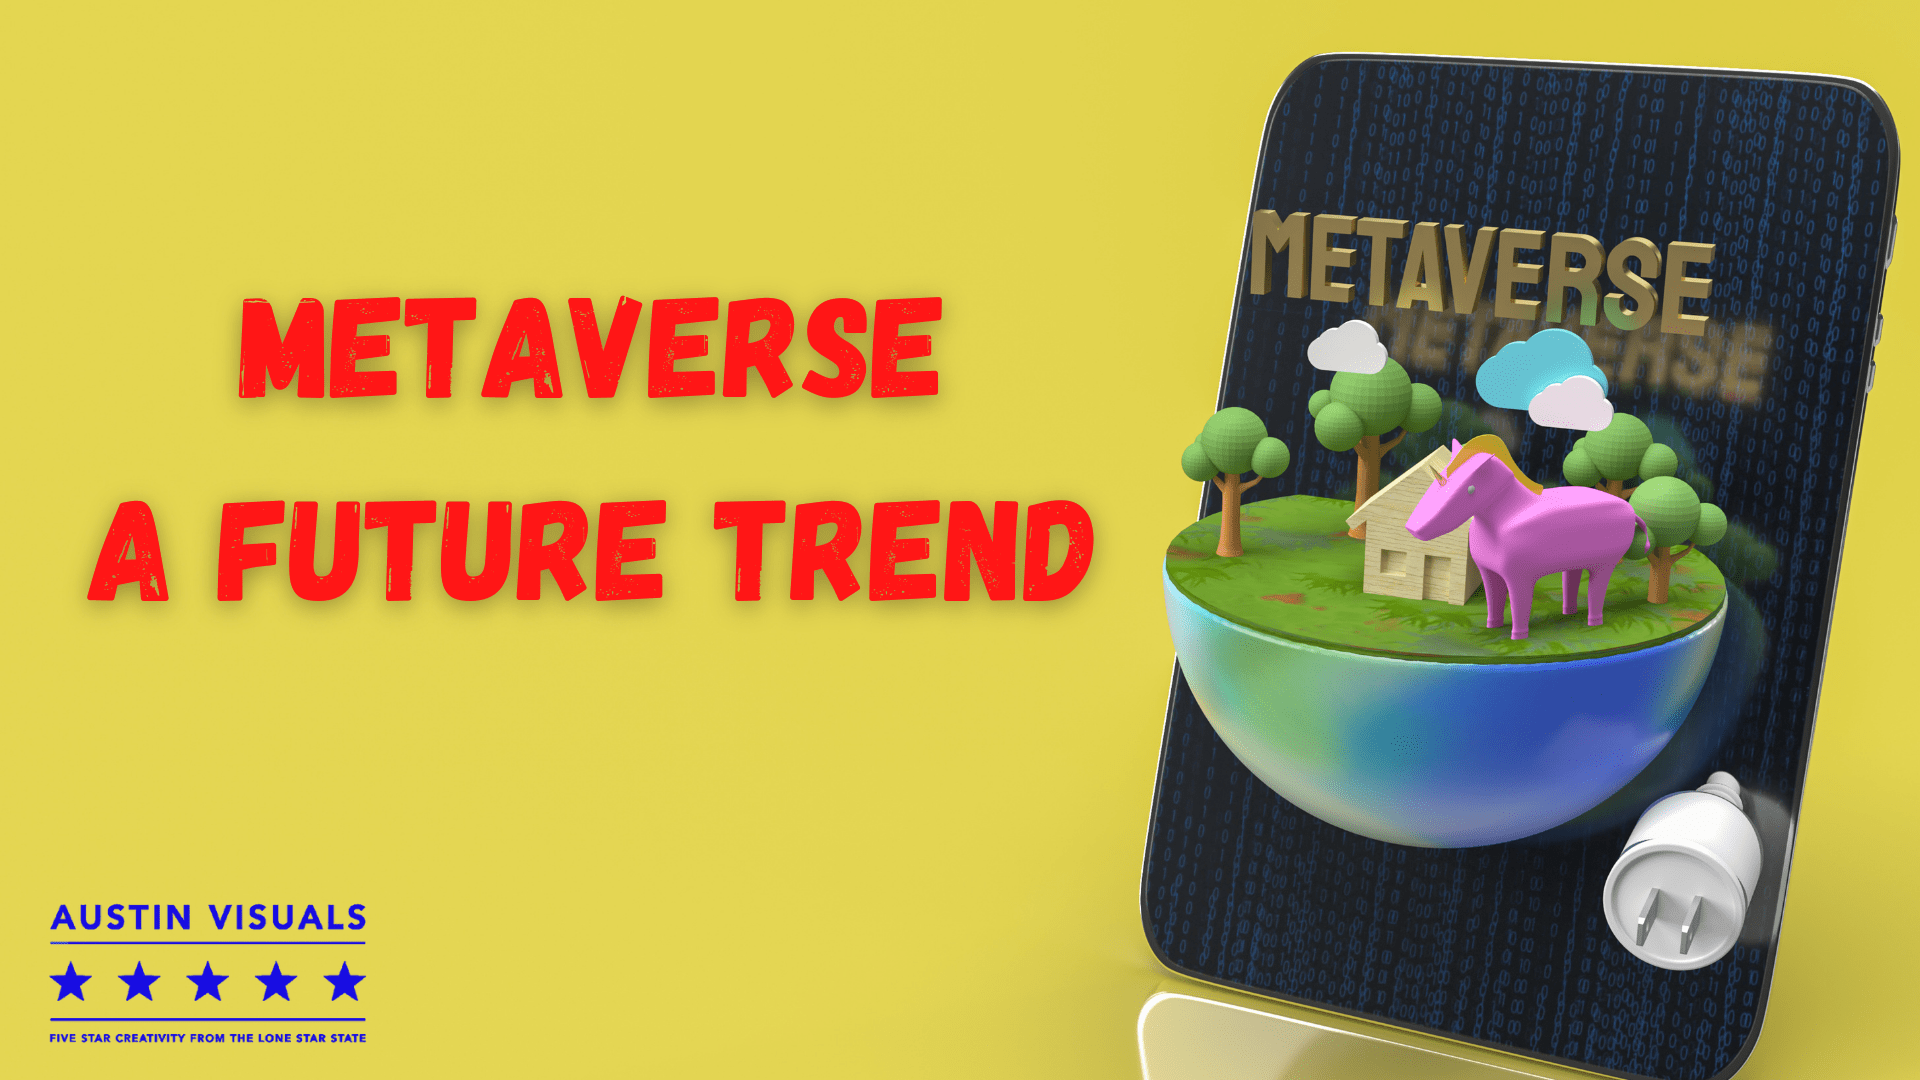 Metaverse A Future Trend explainer video represented by a metaverse land with a horse tree and a house designed nft on it